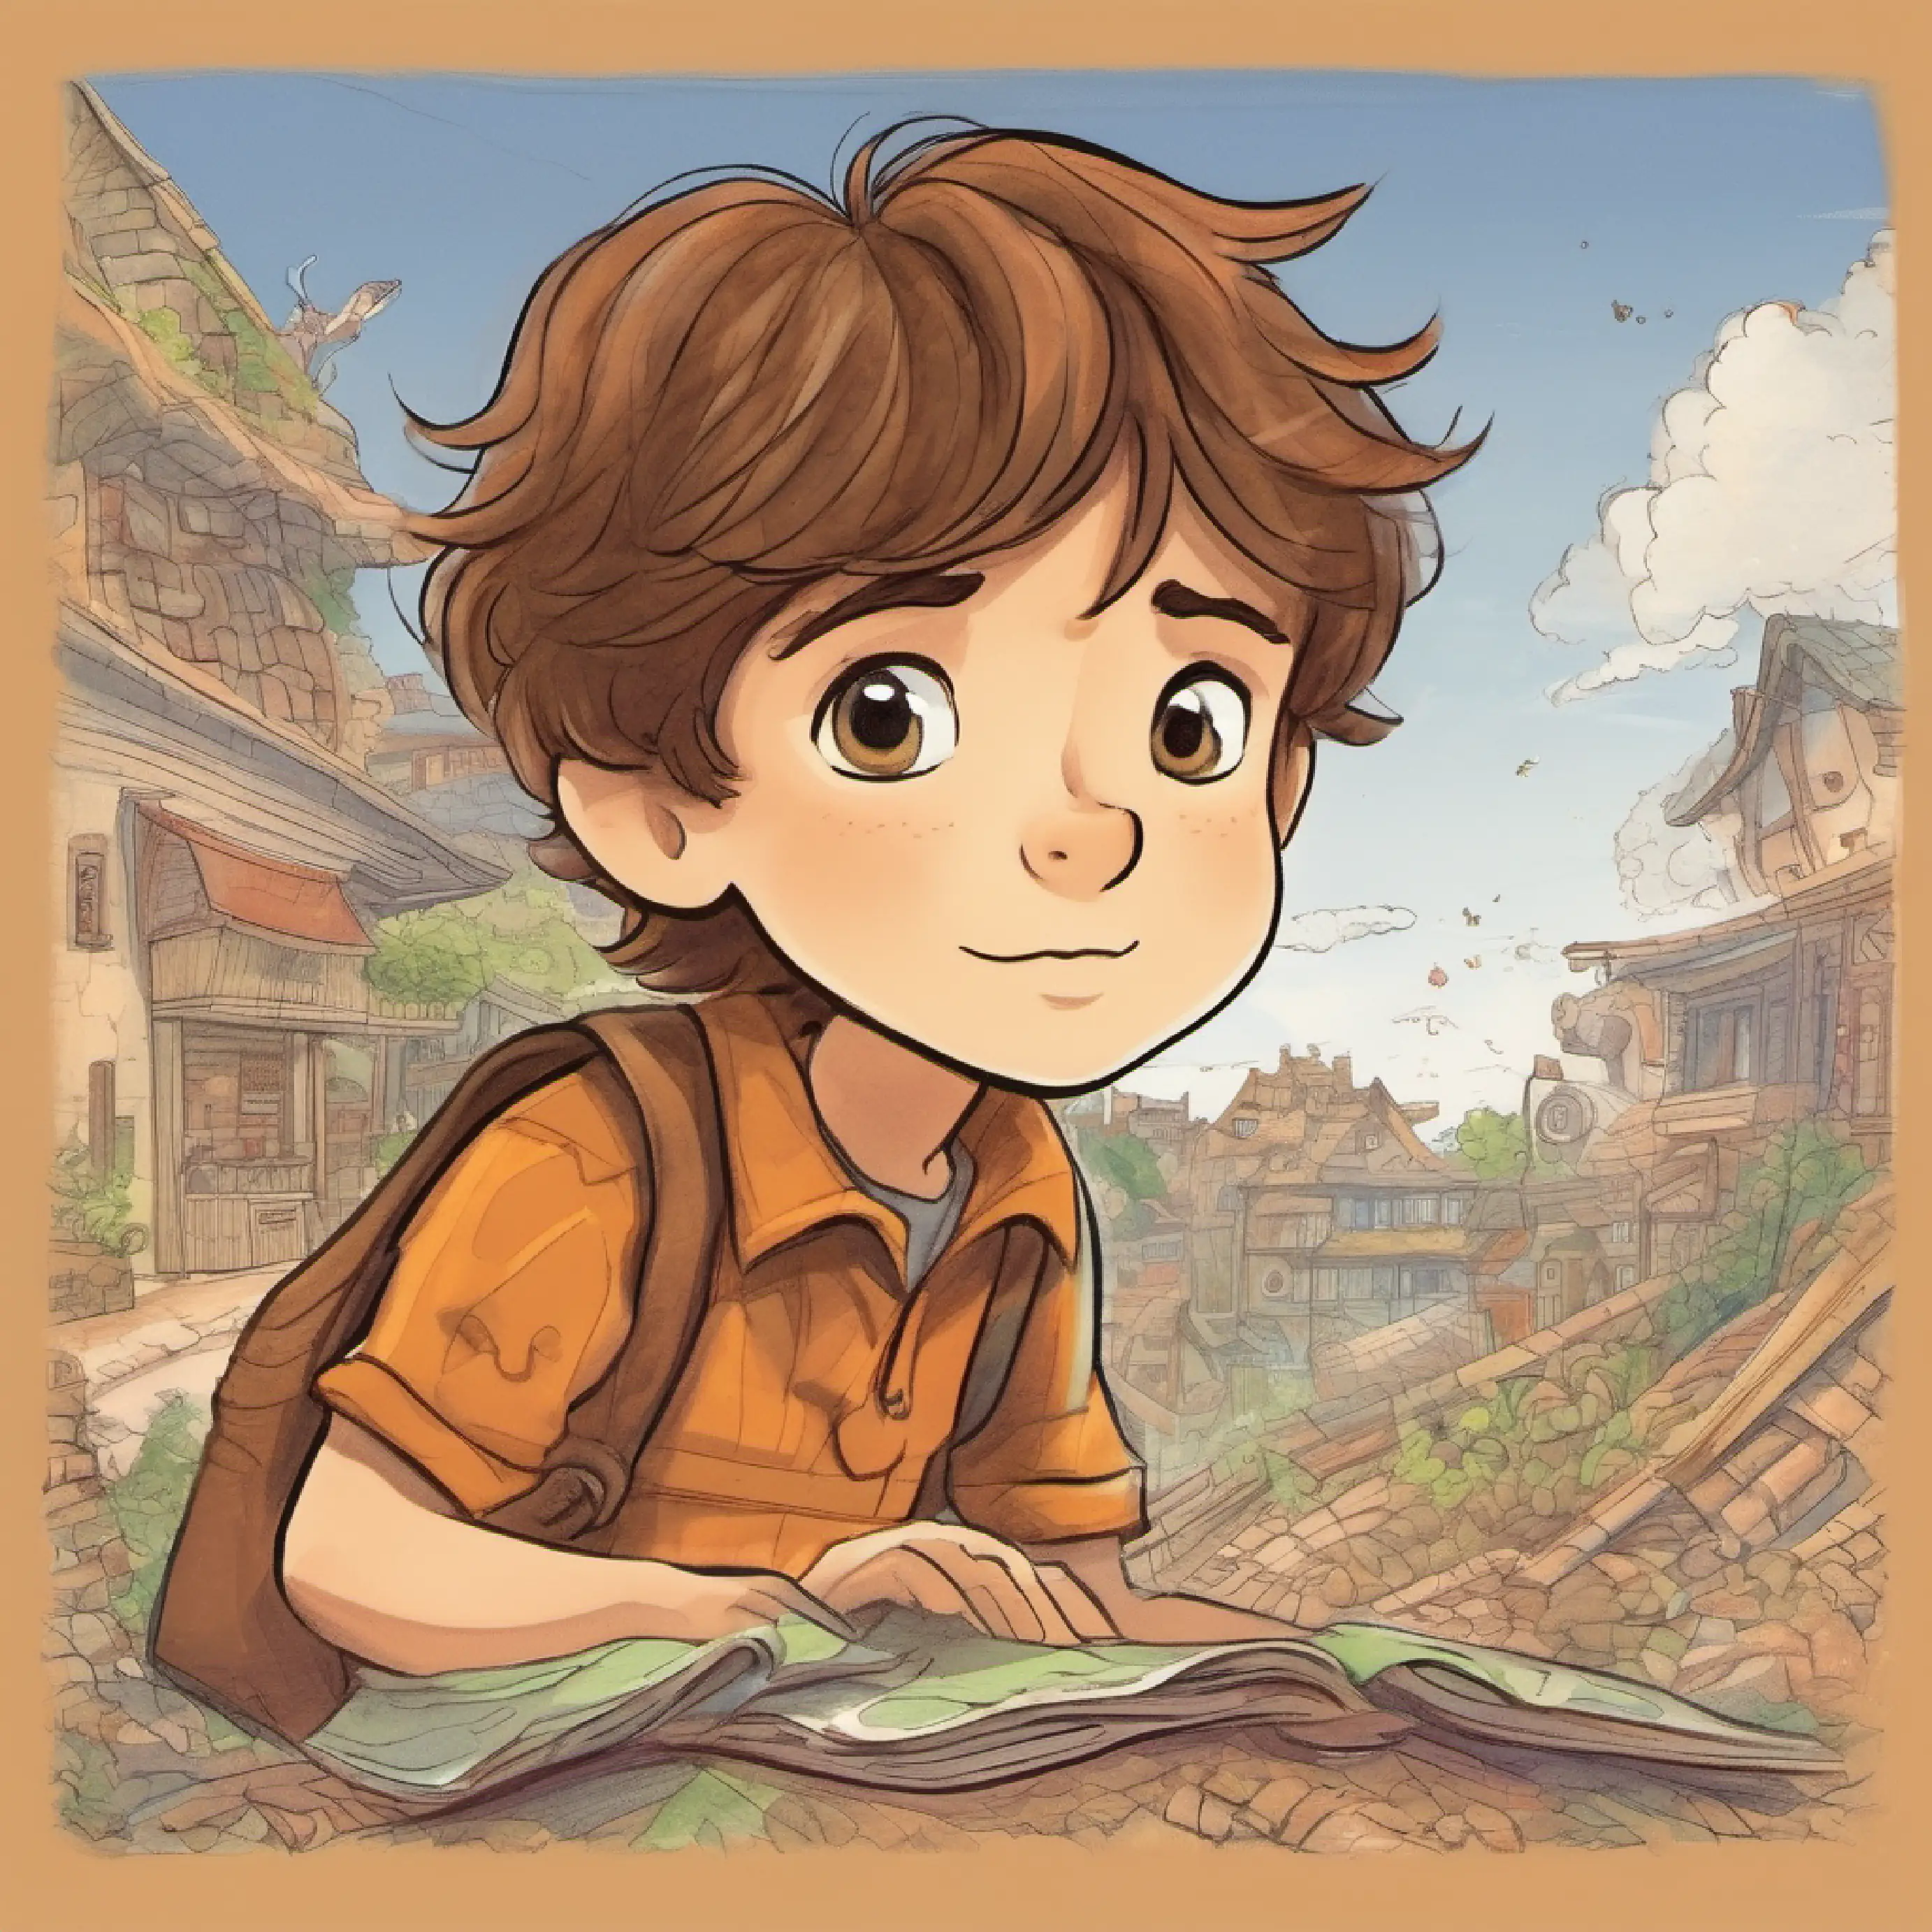 Play in the past, 7-year-old boy, thoughtful hazel eyes, messy brown hair notices changes, understanding of impacts on time